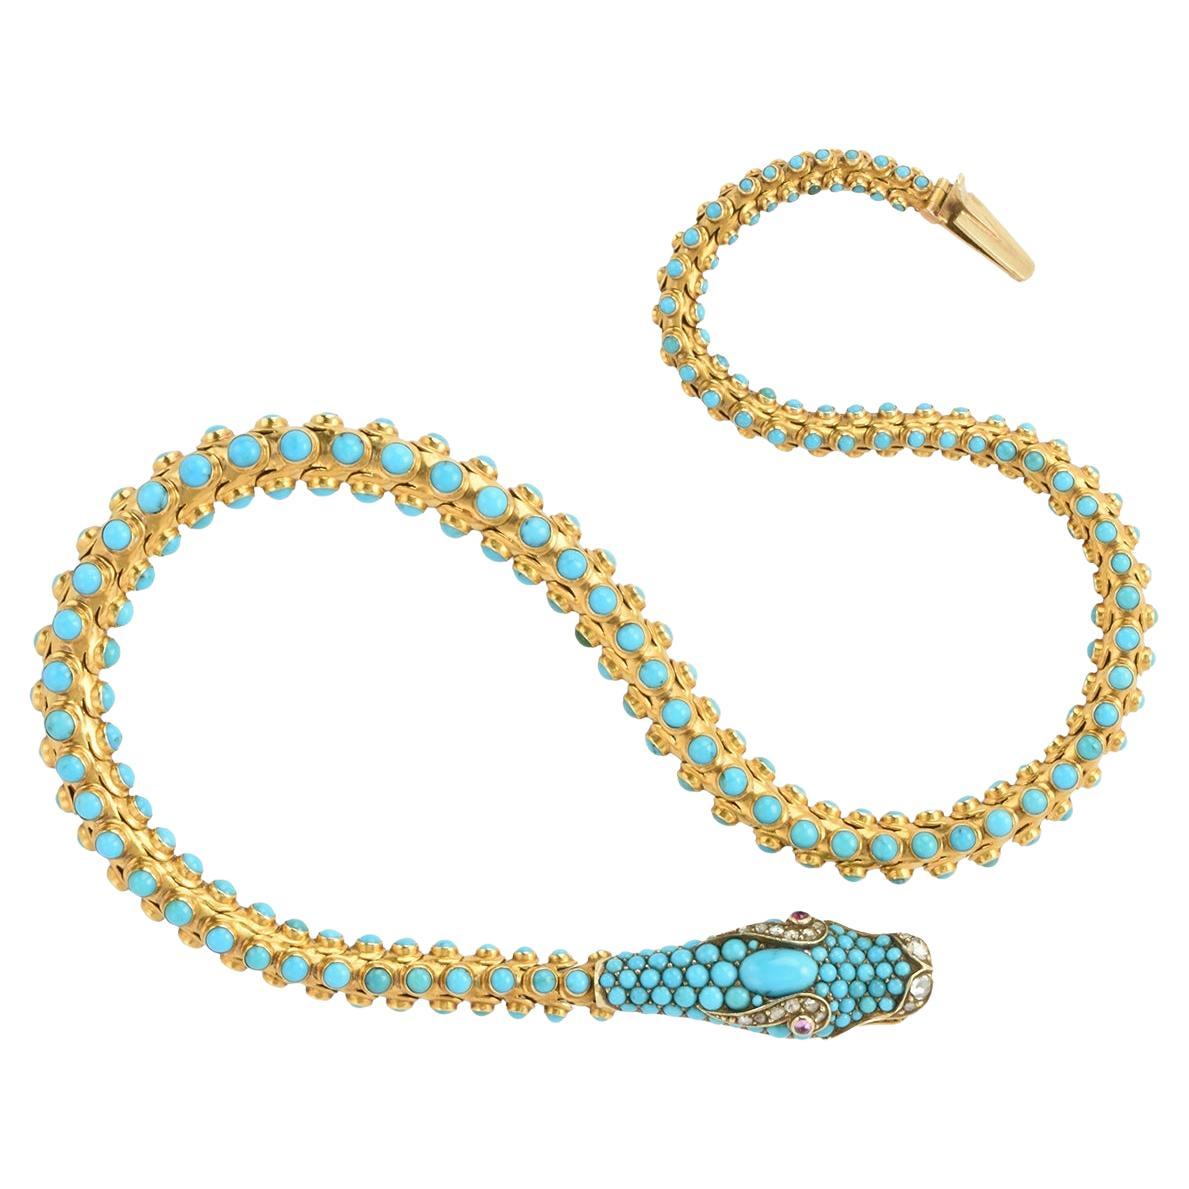 Victorian 15k Gold & Turquoise Snake Necklace, circa 1860 For Sale